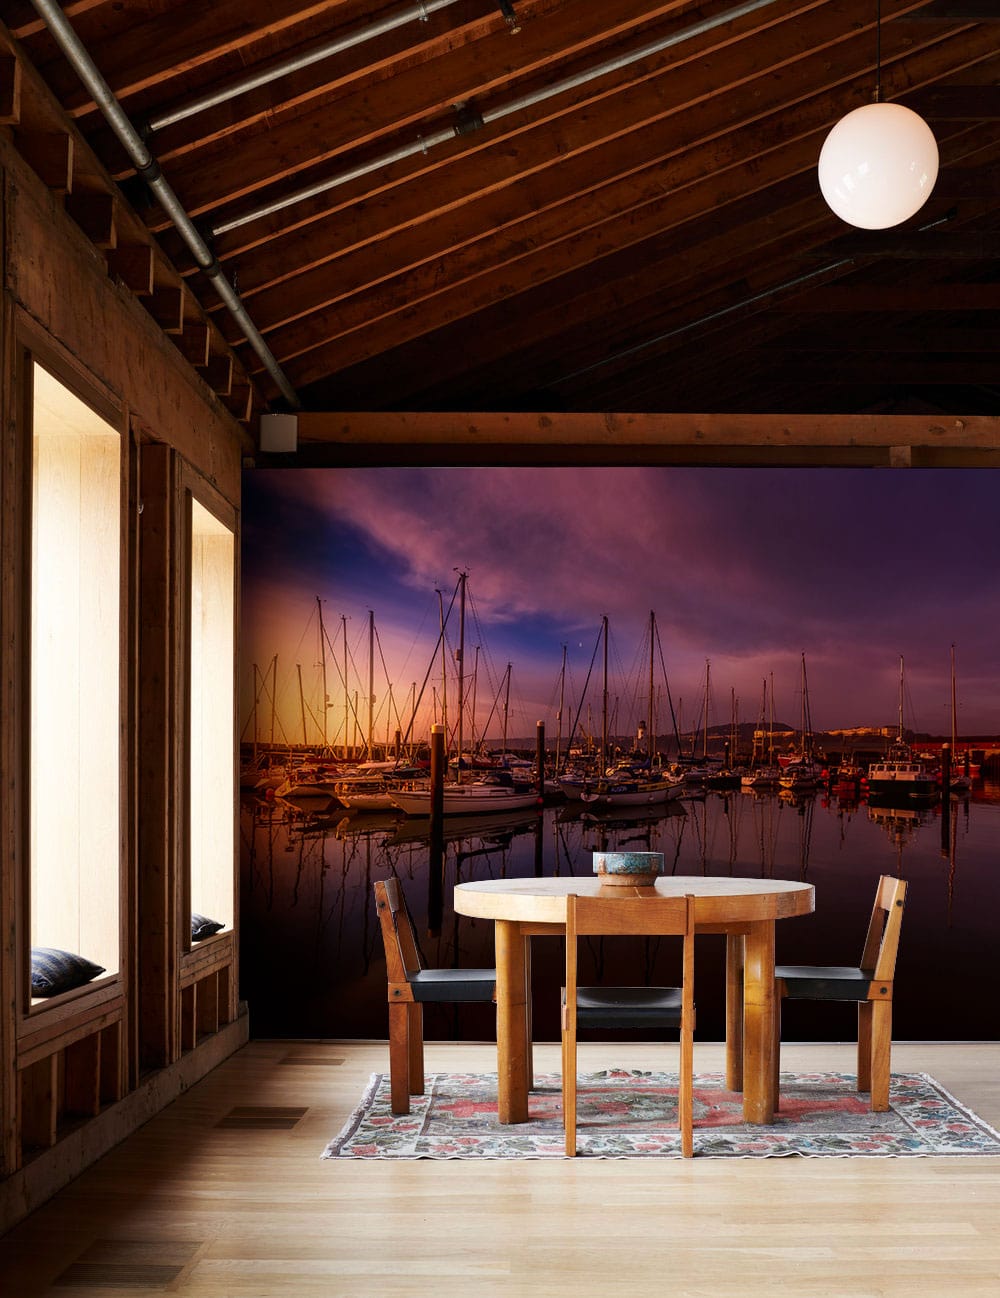 Wallpaper mural depicting a harbor with sailboats and a sunset for the dining room.